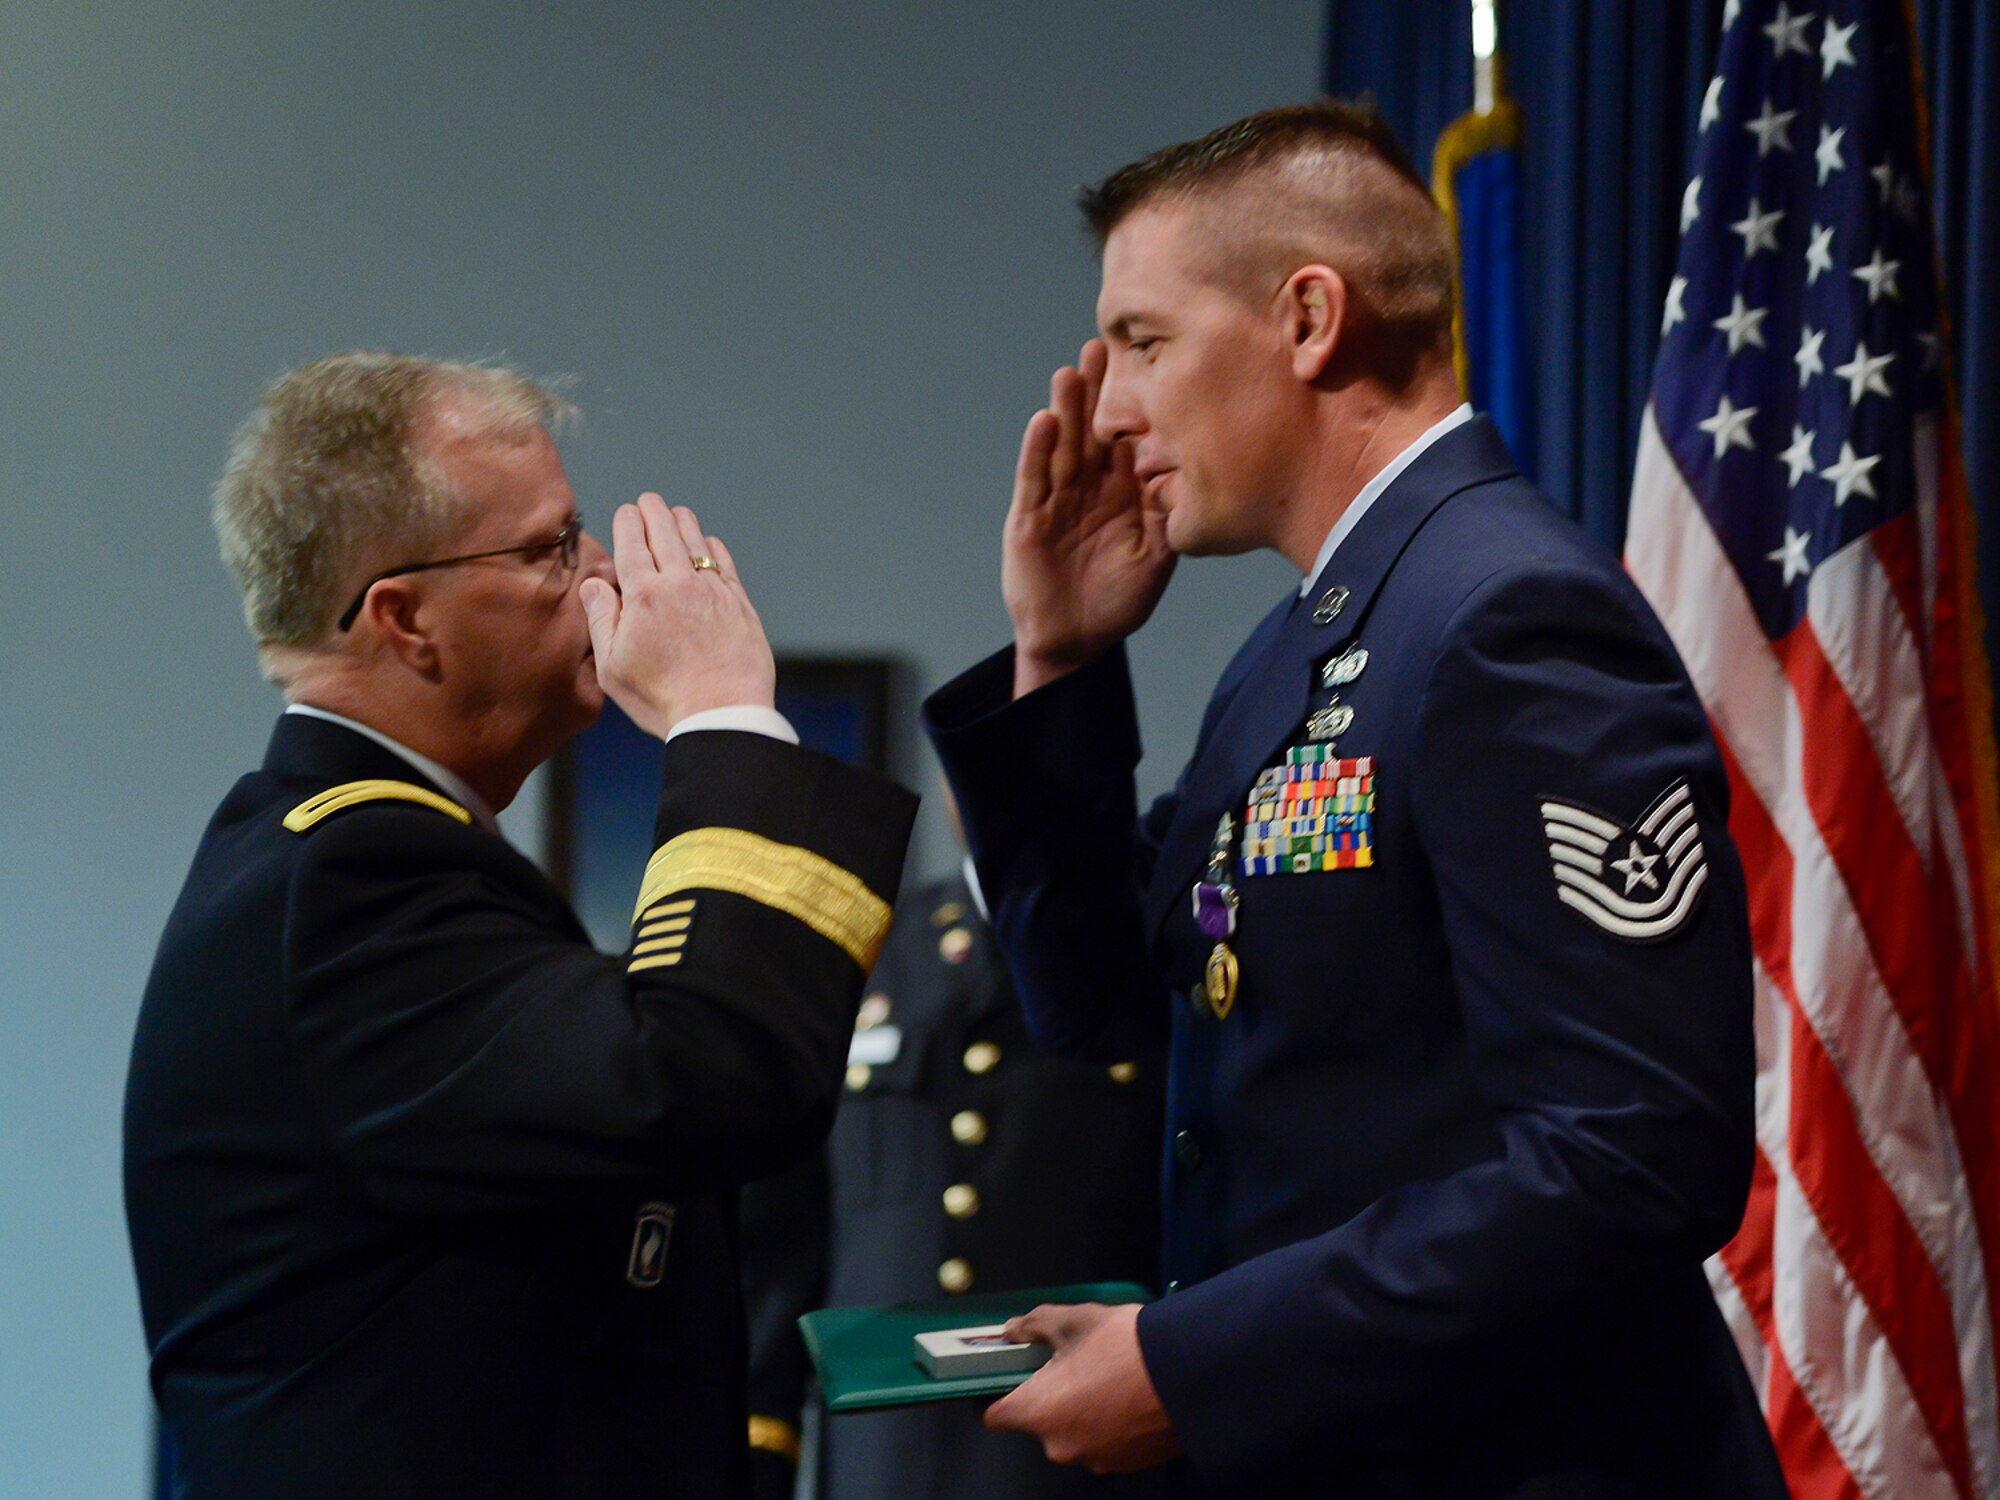 Oklahoma Air National Guard Tech. Sgt. Kody Jorgensen, assigned to the 138th Logistics Readiness Squadron, receives a Purple Heart from Brig. Gen. Craig M. McGalliard, Assistant Adjutant General - Army, Georgia National Guard, Commander 78th Troop Command, Sept. 6, 2014, at the Tulsa Air National Guard base, Tulsa Okla. Jorgensen was wounded August 27, 2012, while serving in Afghanistan with the Georgia National Guard's 265th Regional Support Group, Agri-business Development Team II.  (U.S. National Guard photo by Master Sgt.  Mark A. Moore/Released)